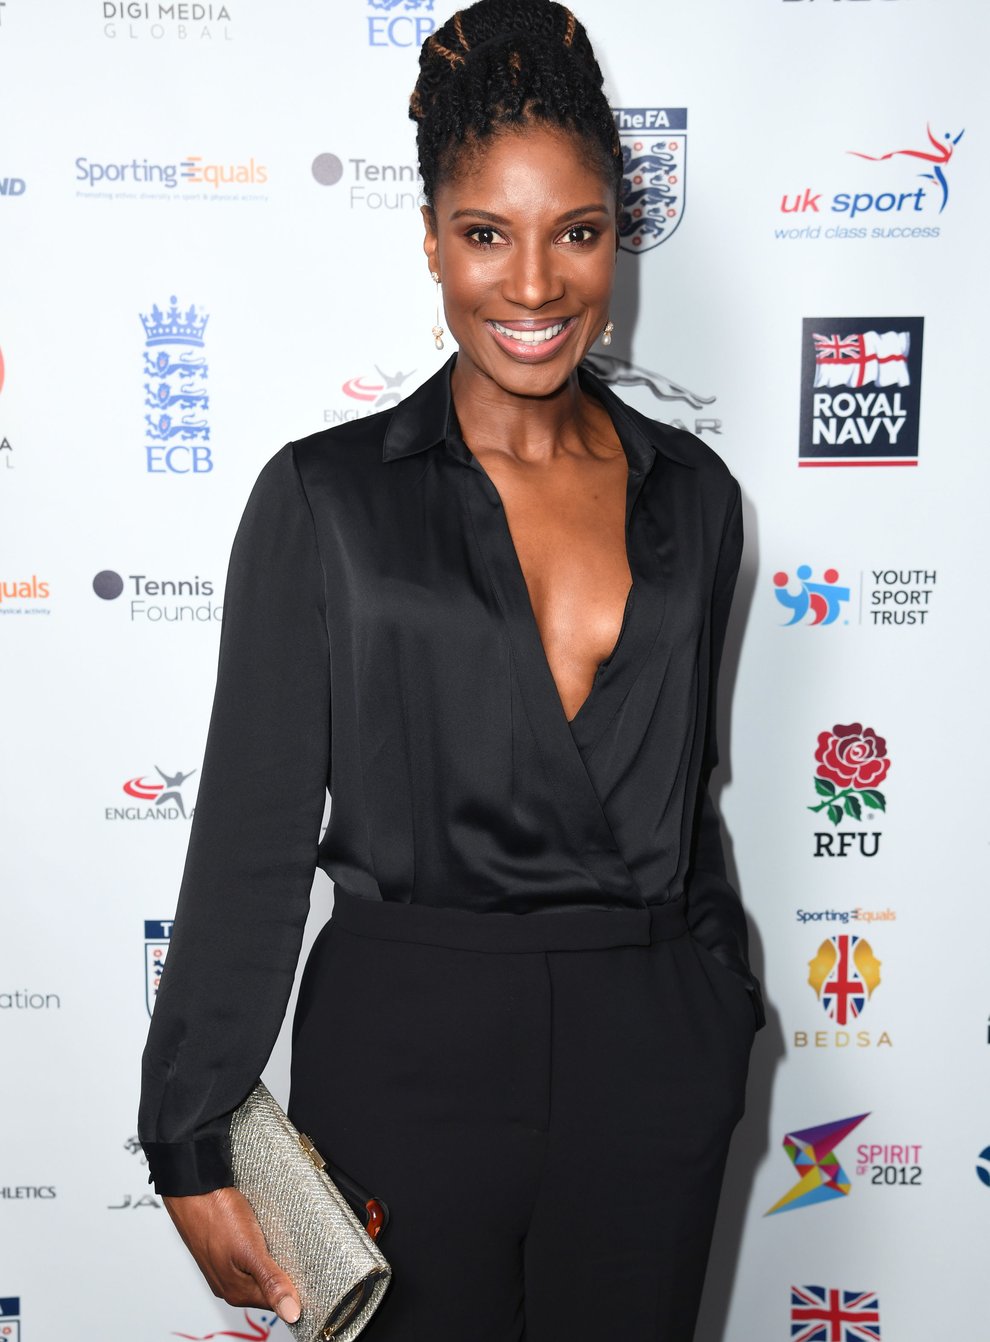 Denise Lewis believes athletes shouldn't feel forced to 'take a knee' as it's an 'individual' choice 